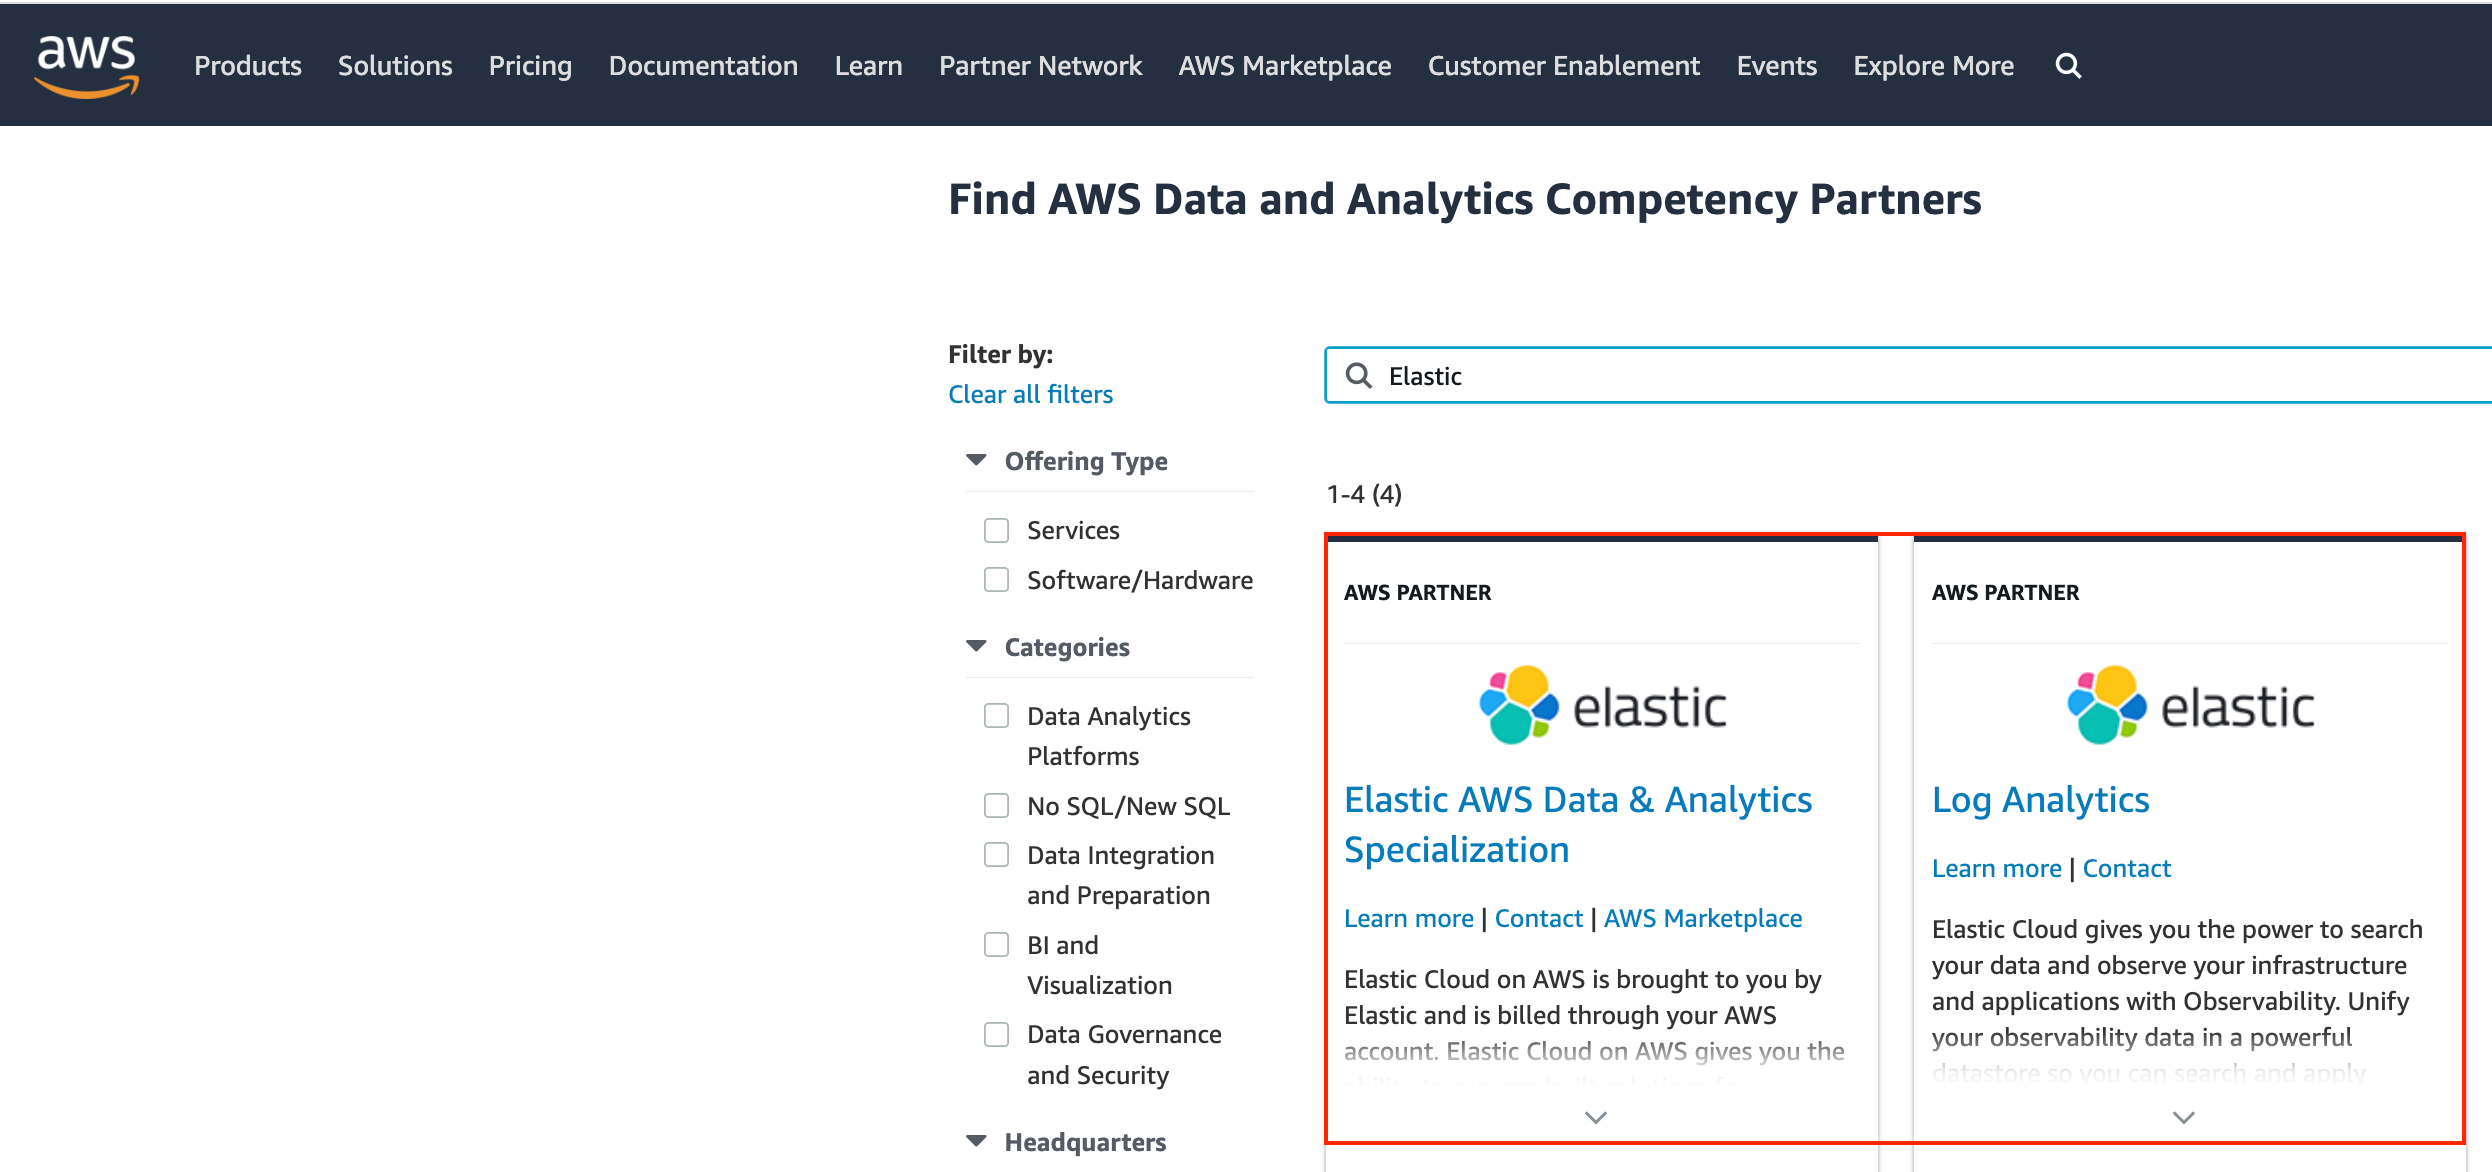 Elastic achieves AWS Data and Analytics Competency